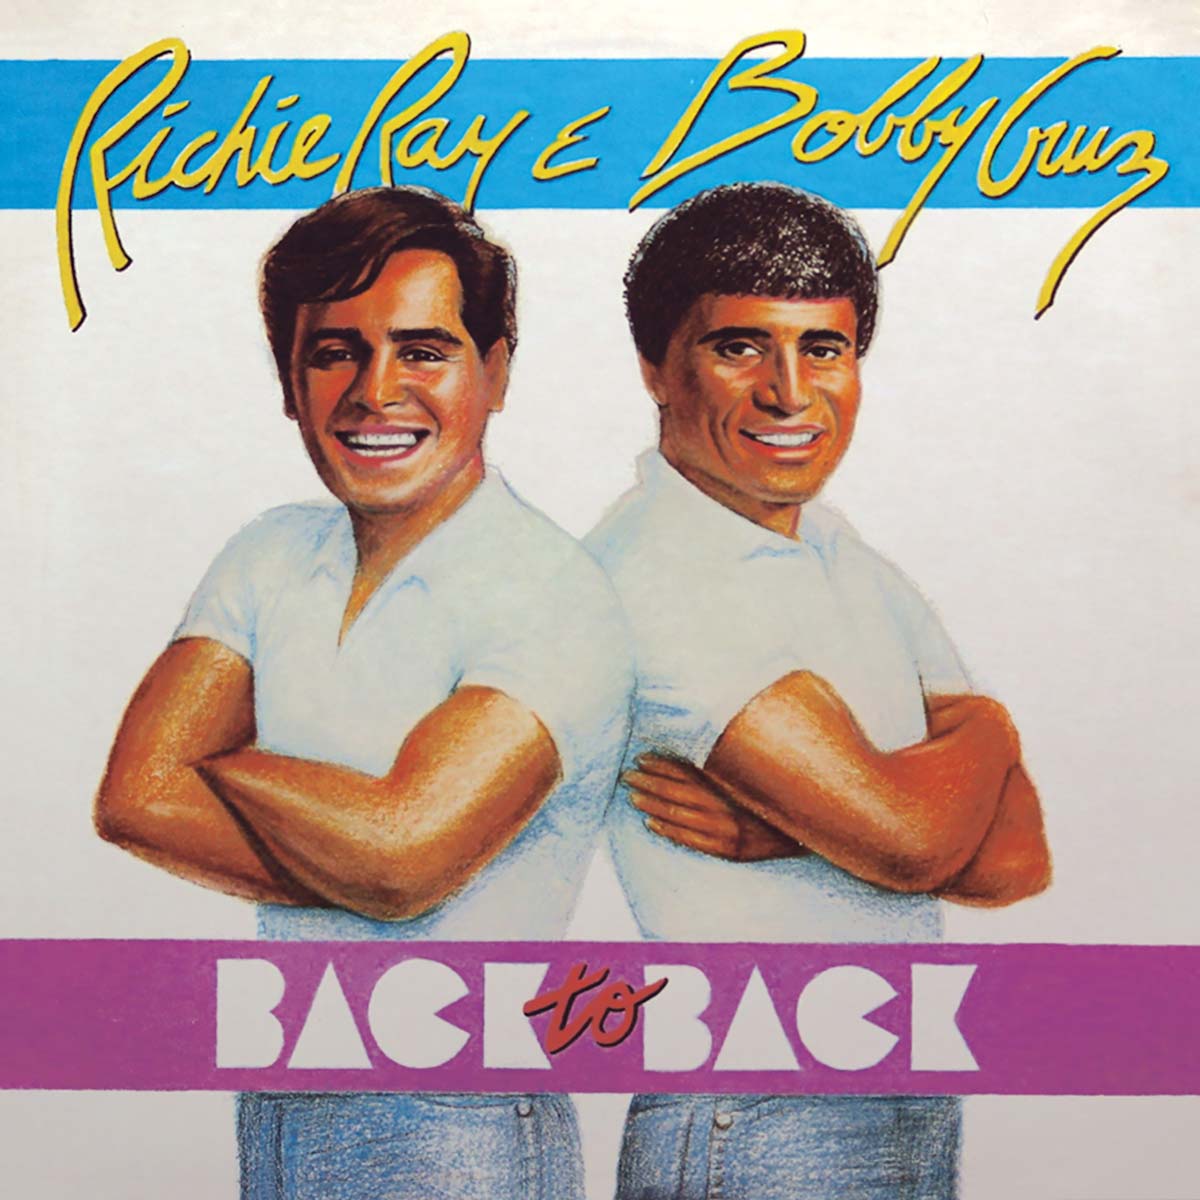 Featured Image for “BACK TO BACK”